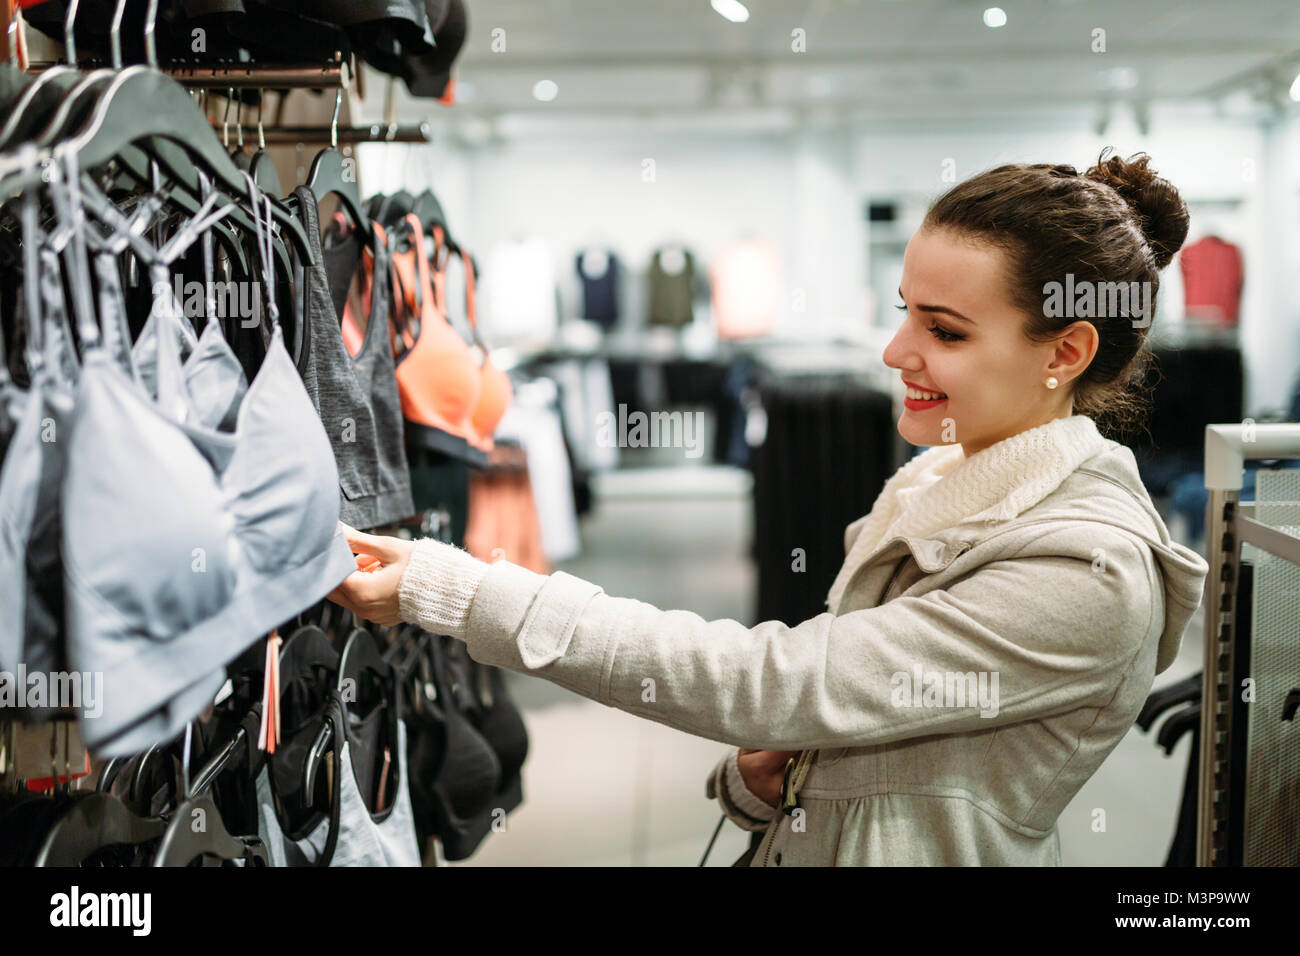 Cheerful Positive Female With Packs And Girl Buying Clothes In The Dress  Shop Stock Photo, Picture and Royalty Free Image. Image 84950579.